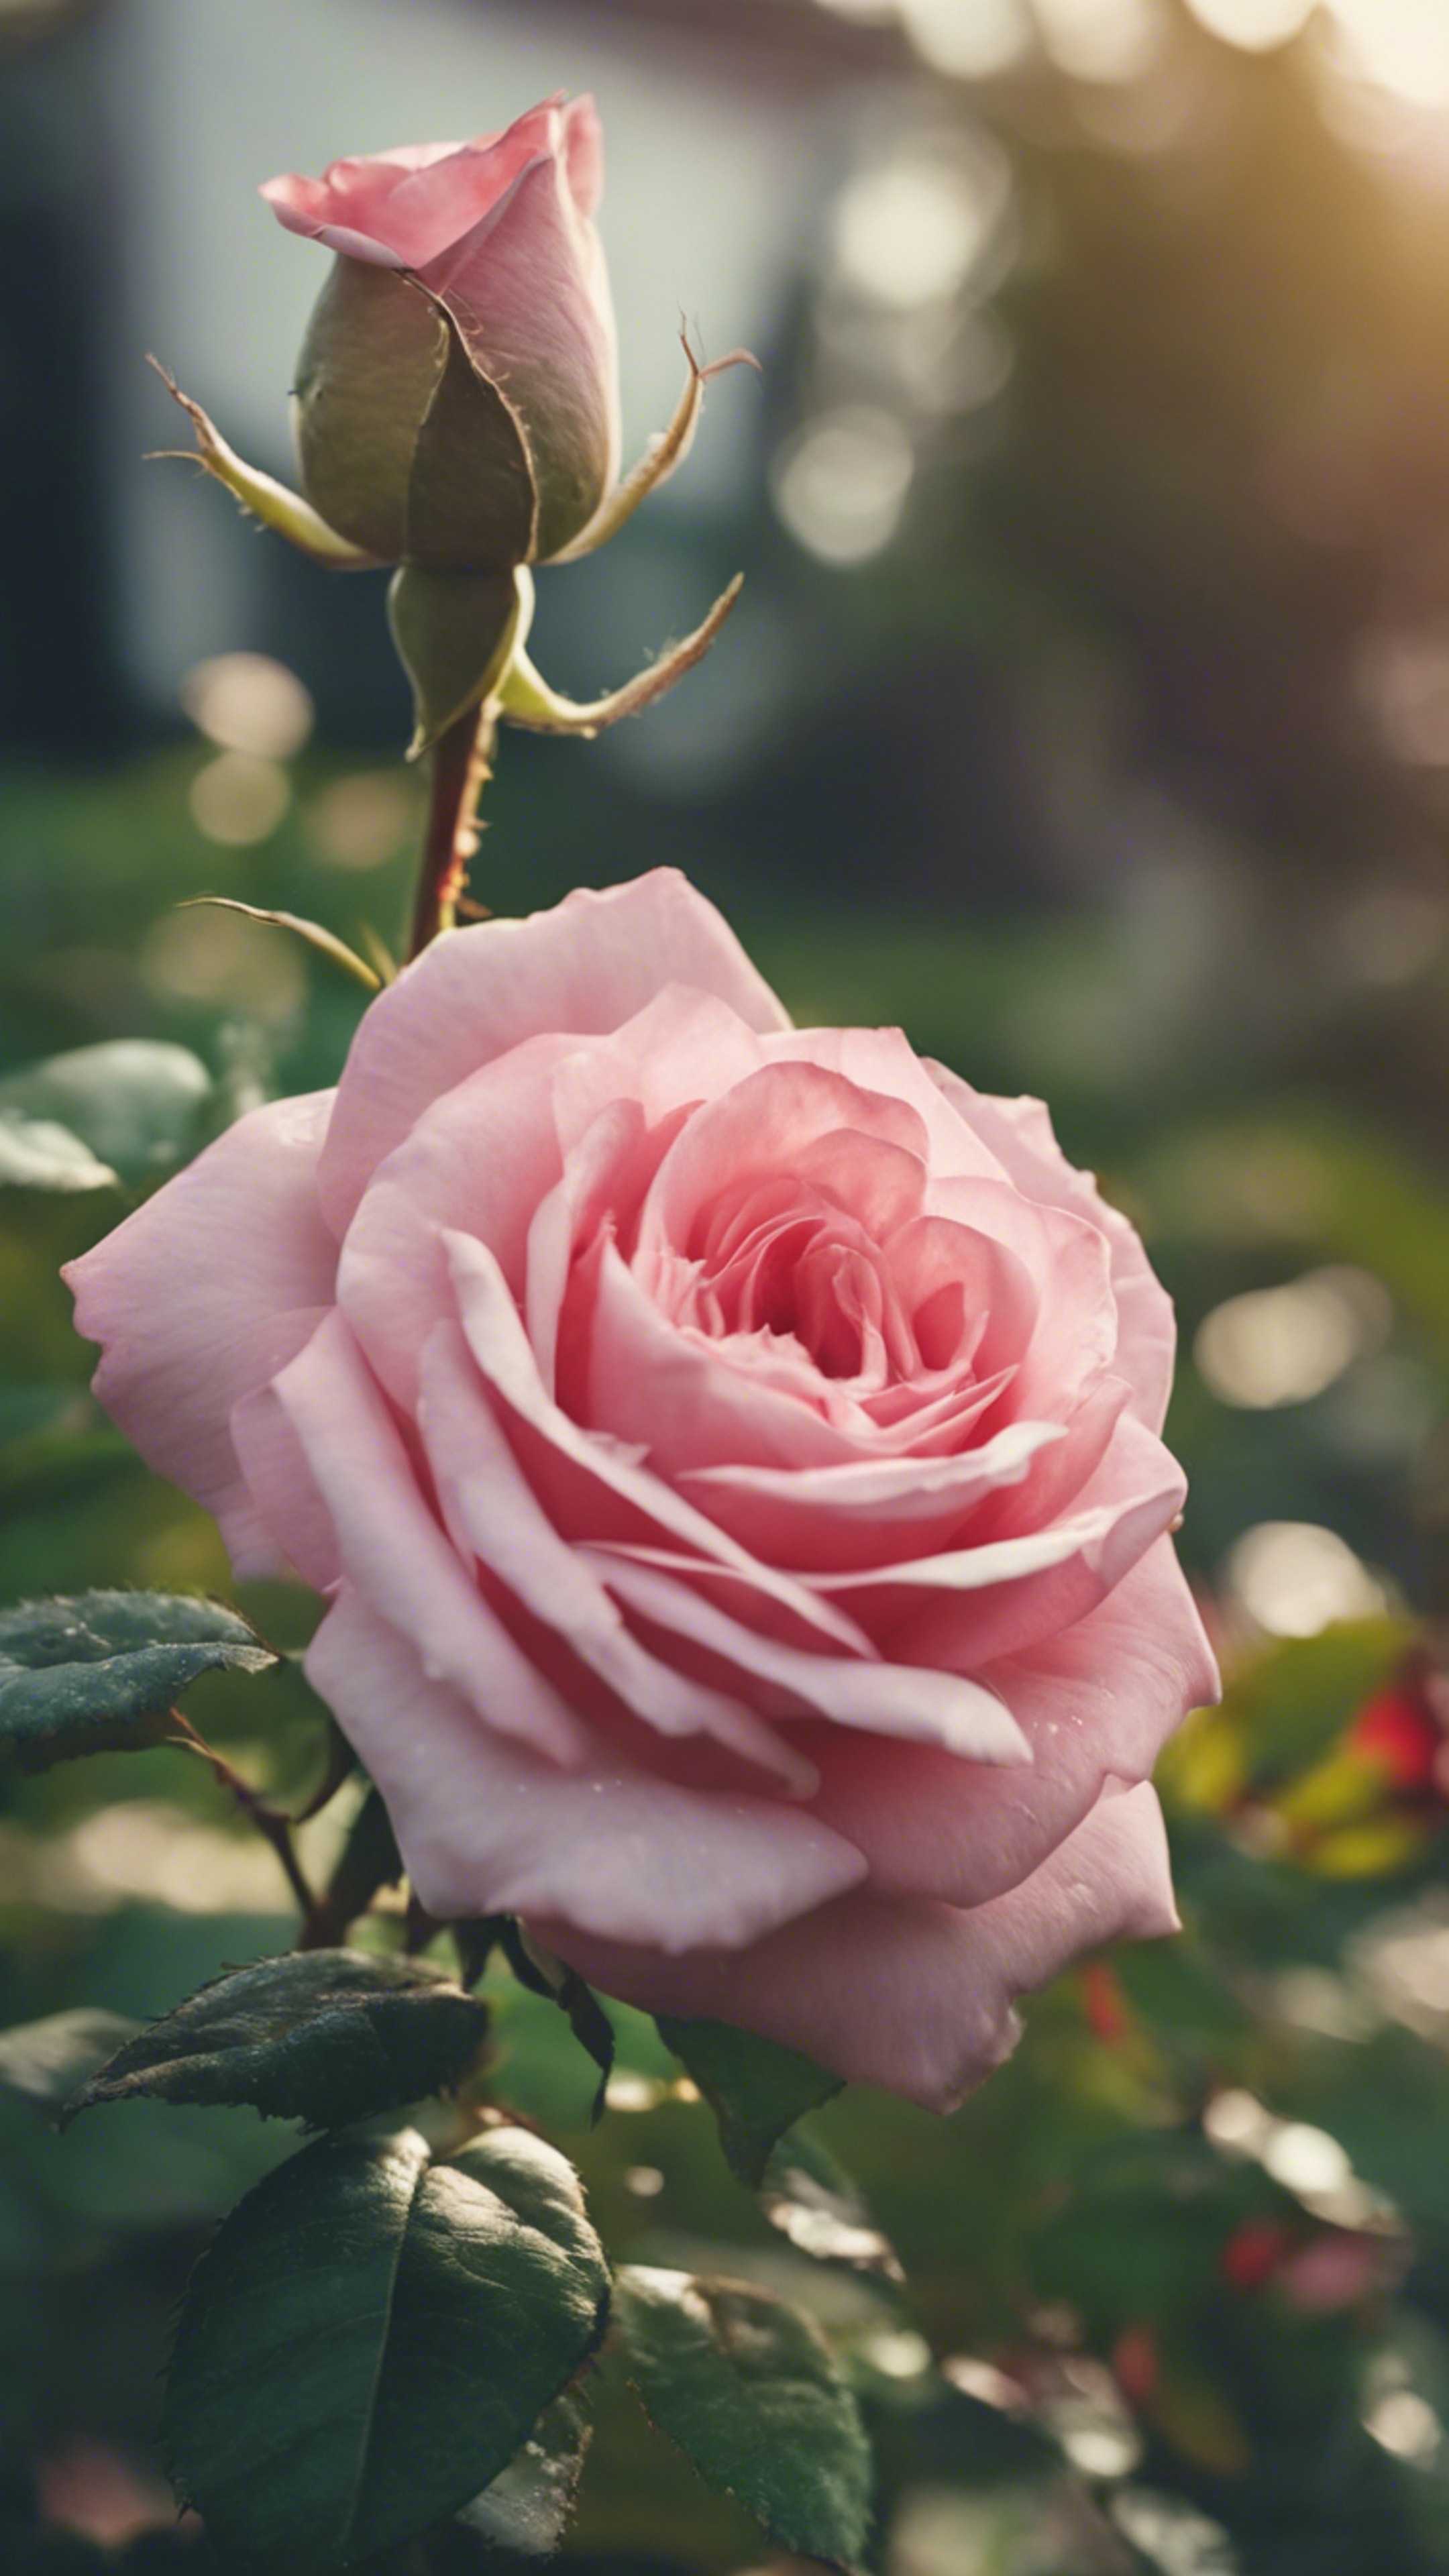 A beautiful pink heart-shaped rose blooming in a lush green garden. Hintergrund[602cae484ee541a8ab0b]